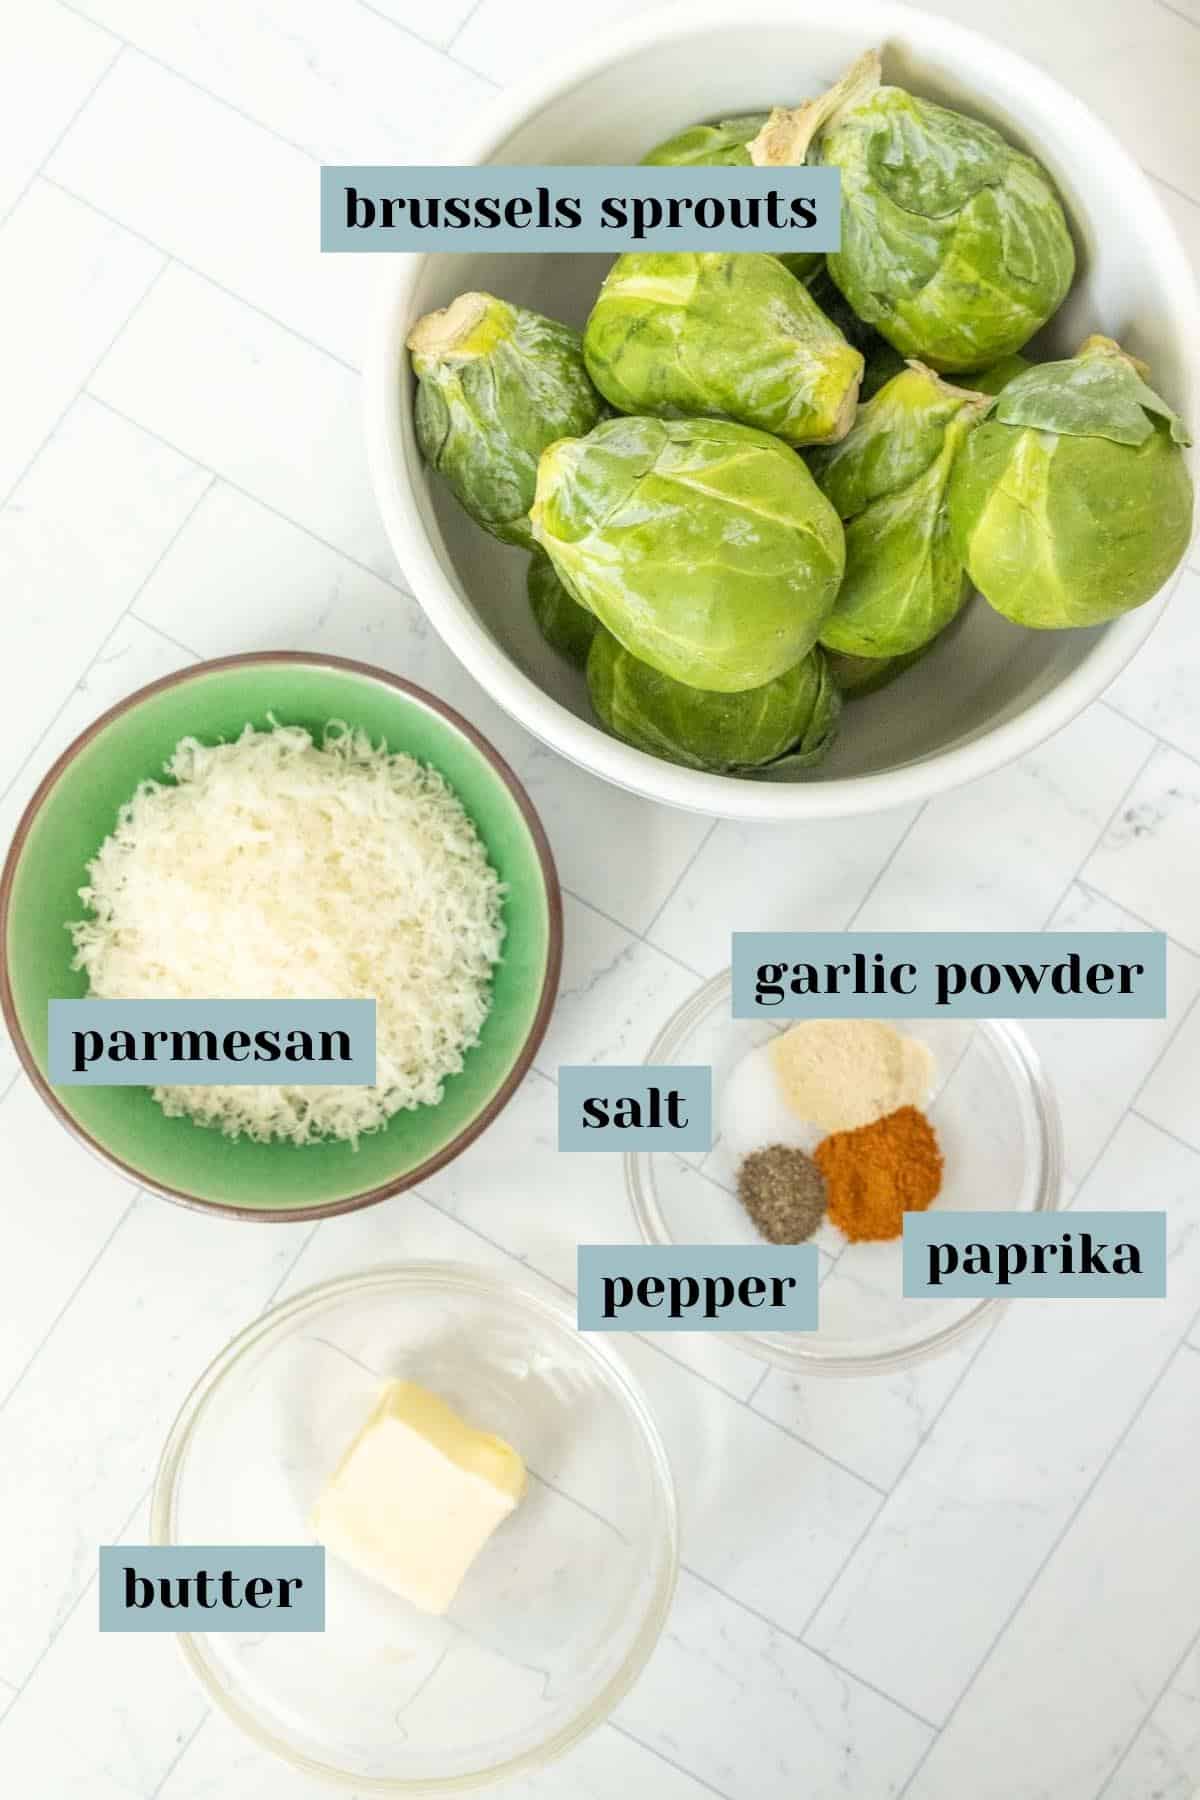 Ingredients for brussels sprouts in a bowl.